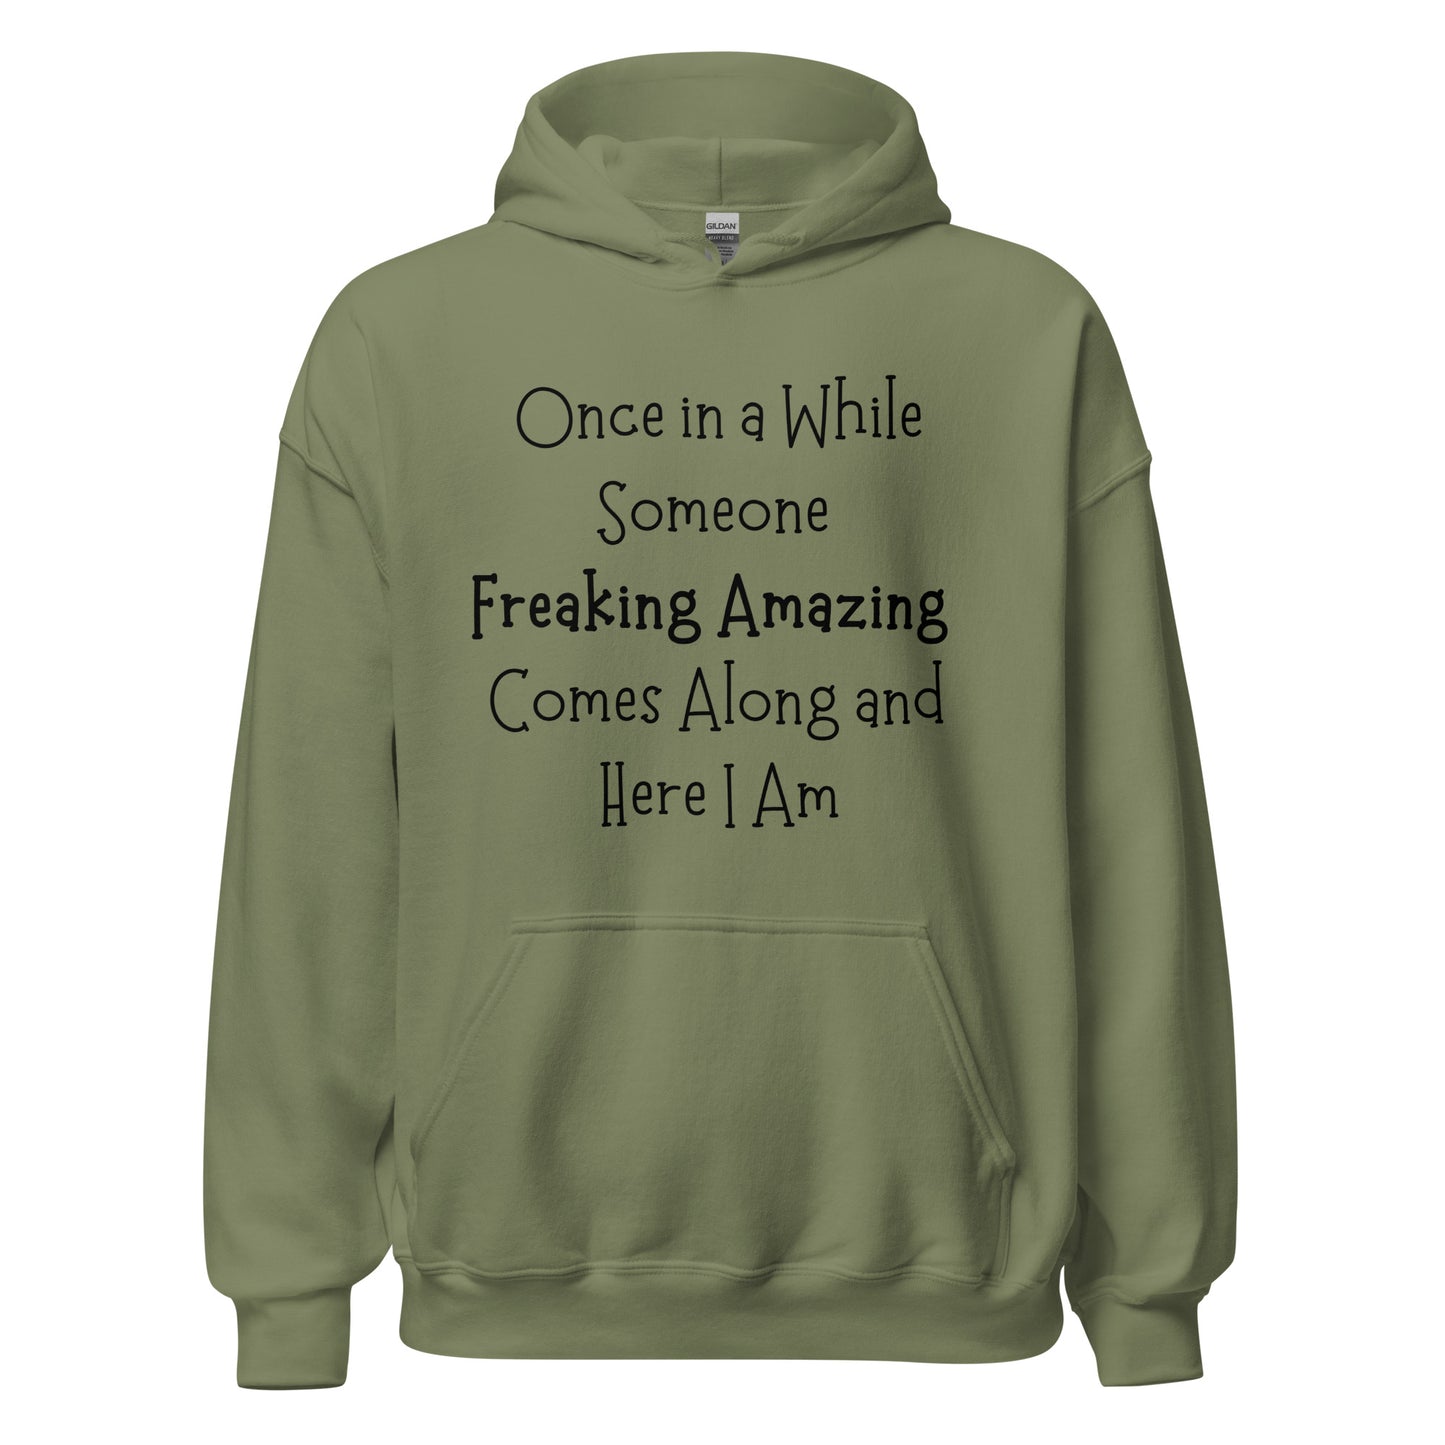 Once In a While Someone Freaking Amazing Comes Along and Here I Am Pullover Hoodie